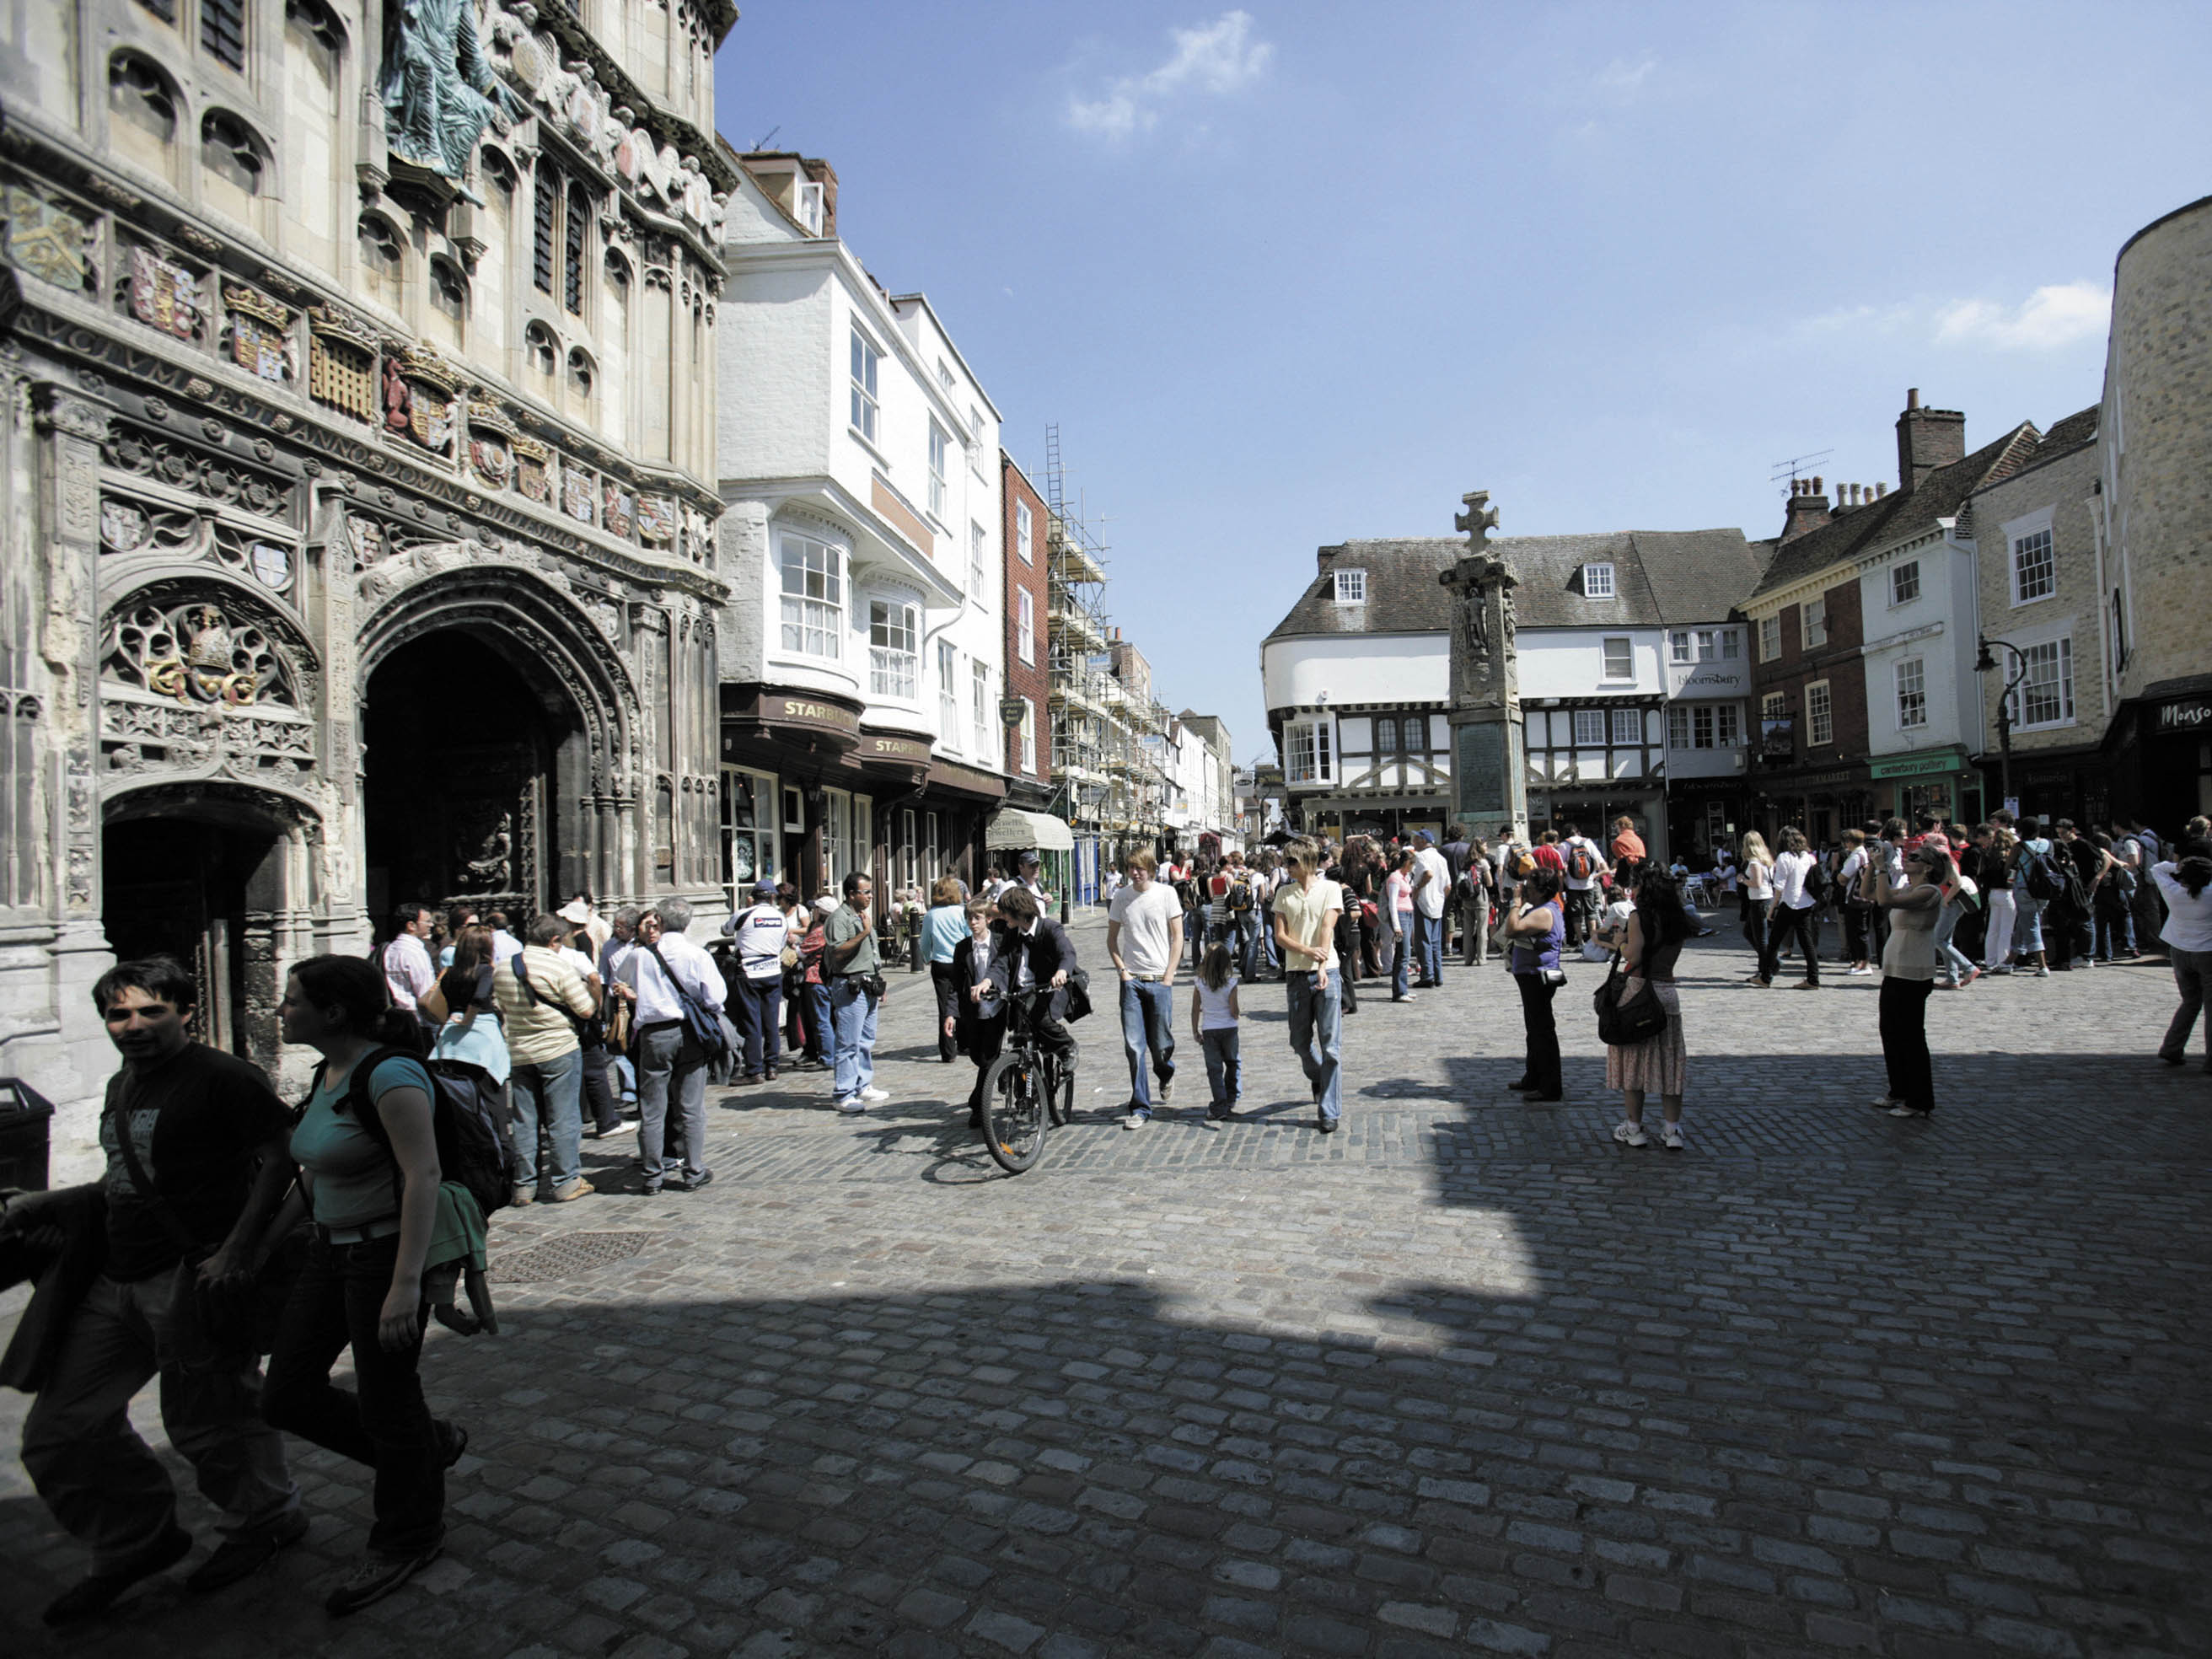 Street view of Canterbury with cobblestone streets and old buildings